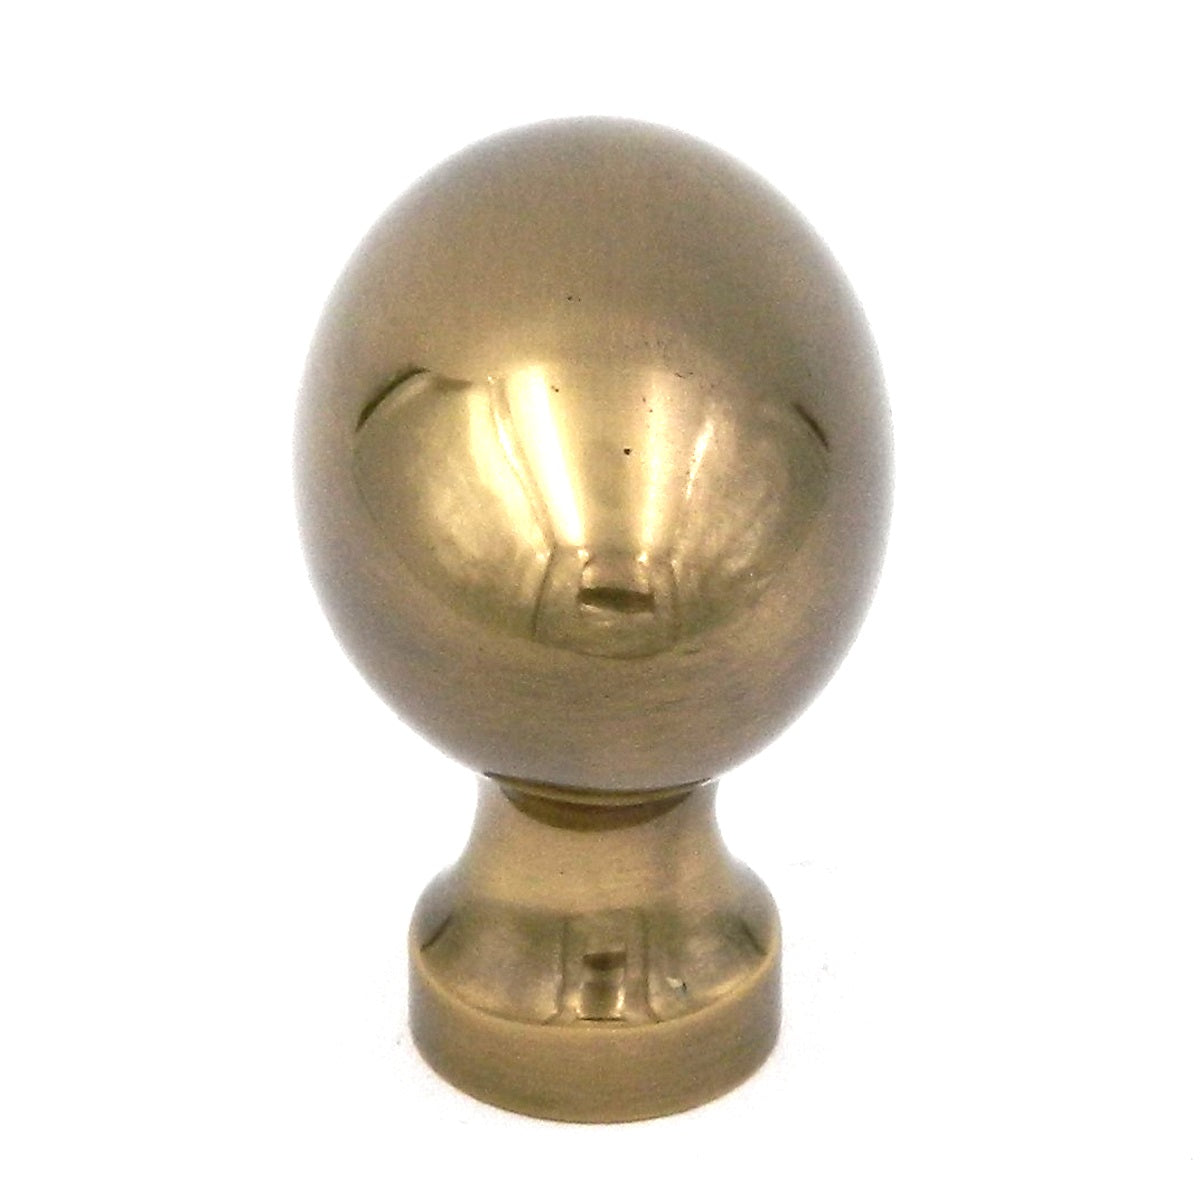 Keeler Power & Beauty Sherwood Antique Brass Oval Smooth 1 3/8" Solid Brass Cabinet Knob P9176-07